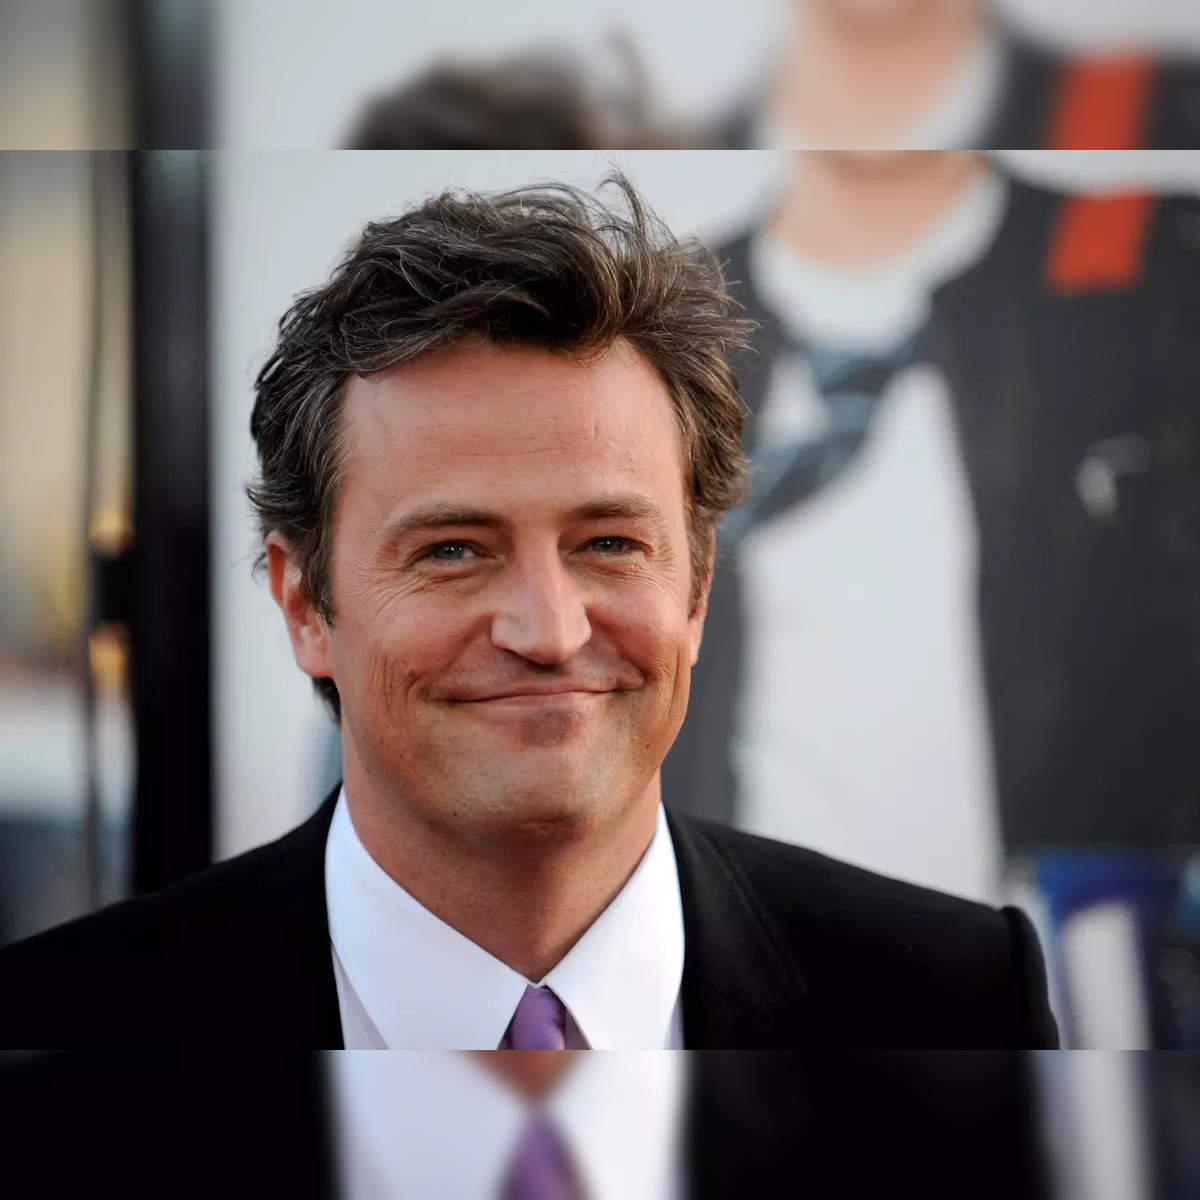 Book review of Matthew Perry memoir Friends, Lovers and the Big